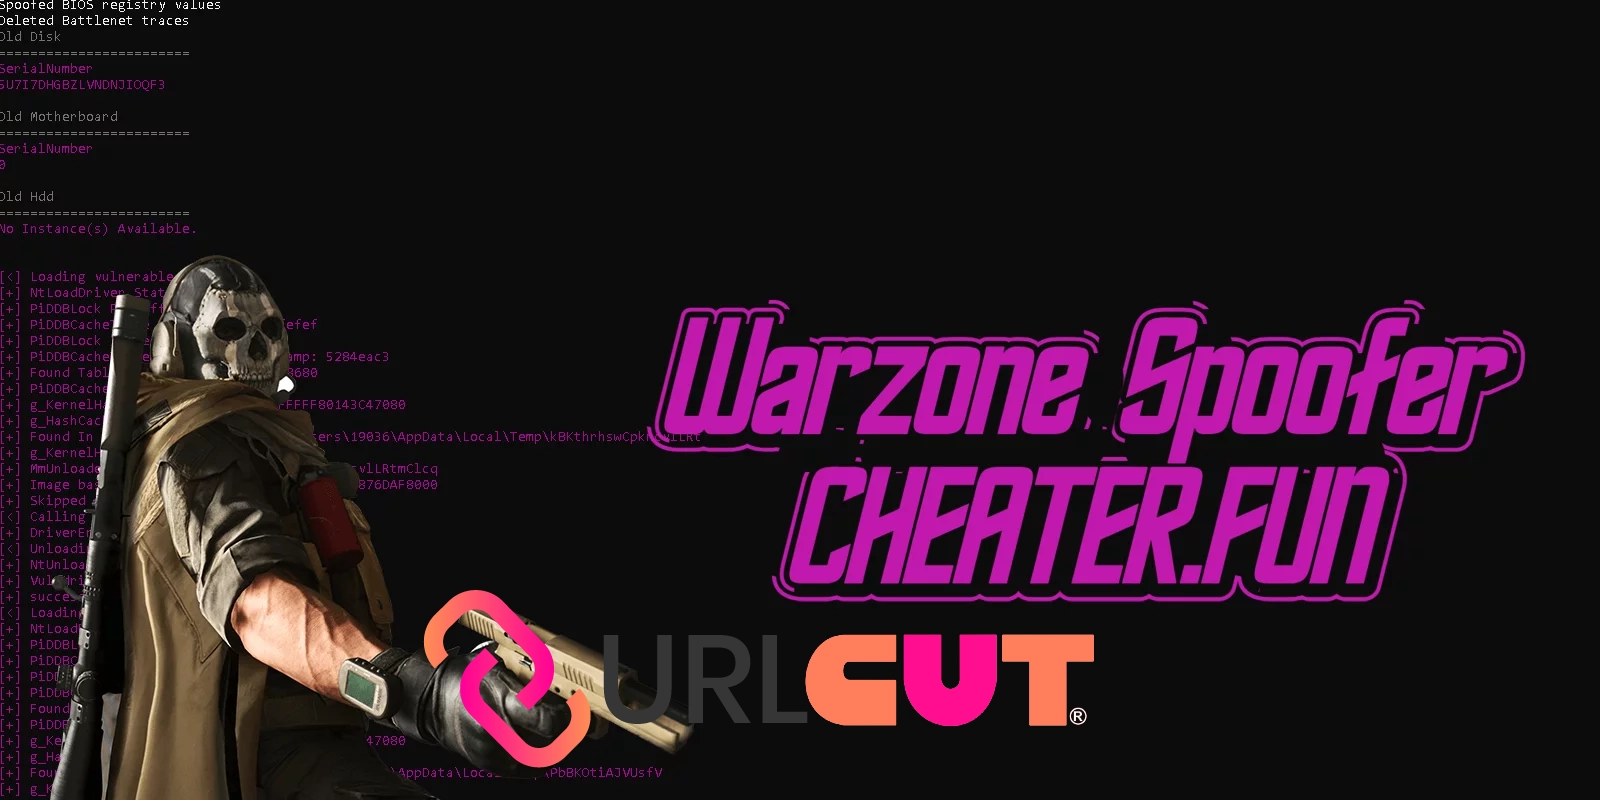  		  Warzone Free Spoofer  		                                                                                                                  	   